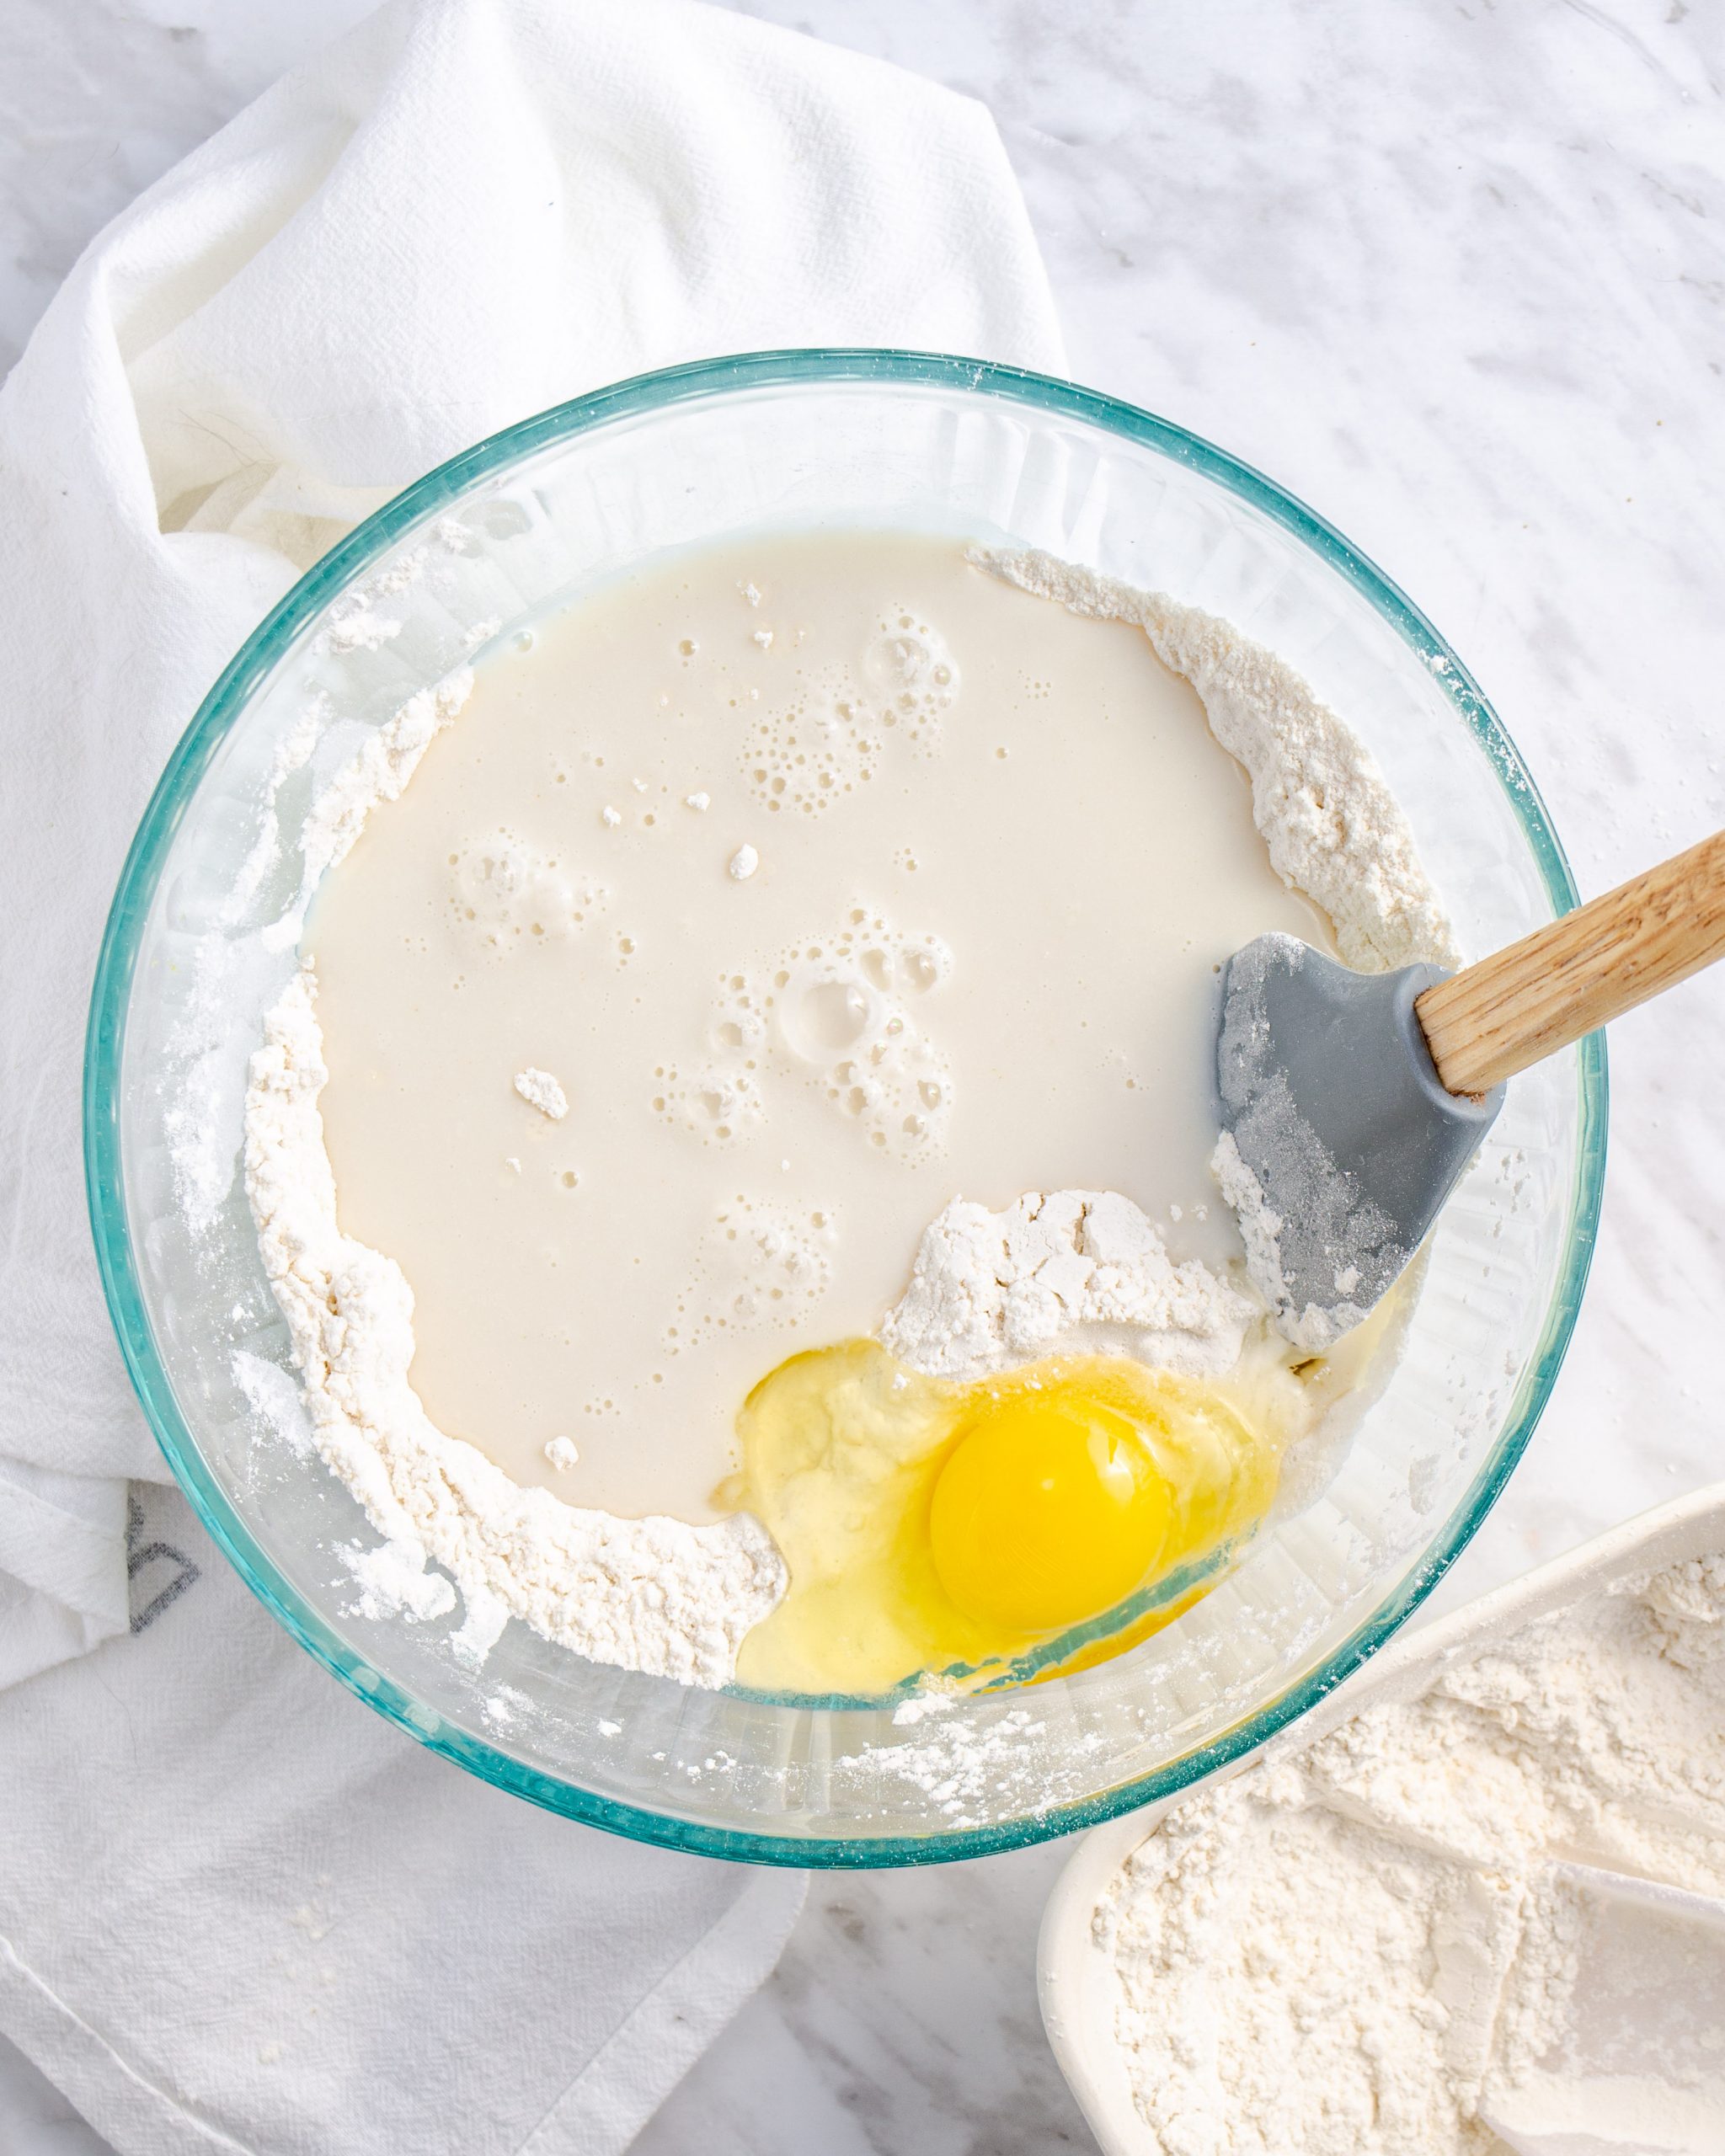 Add the egg and the yeast mixture to the flour mixture, and blend until a dough has formed.